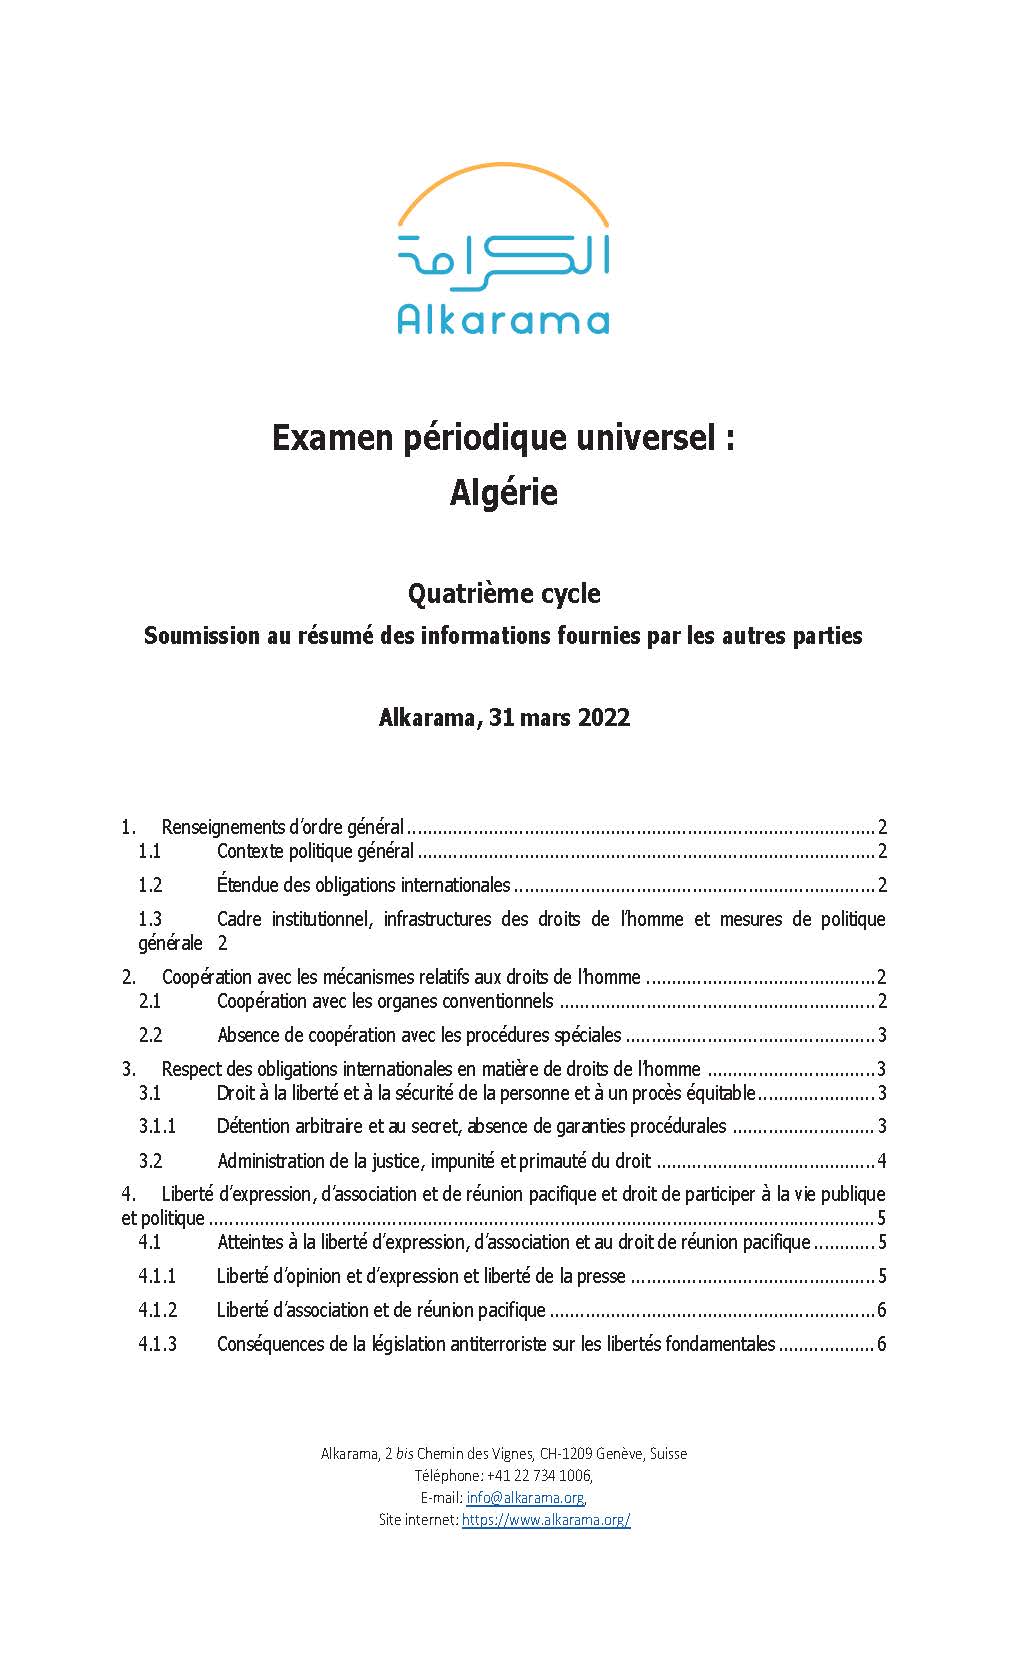 ALGERIA: UNIVERSAL PERIODIC REVIEW 2022 - 4 TH CYCLE - ALKARAMA'S SUBMISSION TO THE STAKEHOLDERS’ SUMMARY